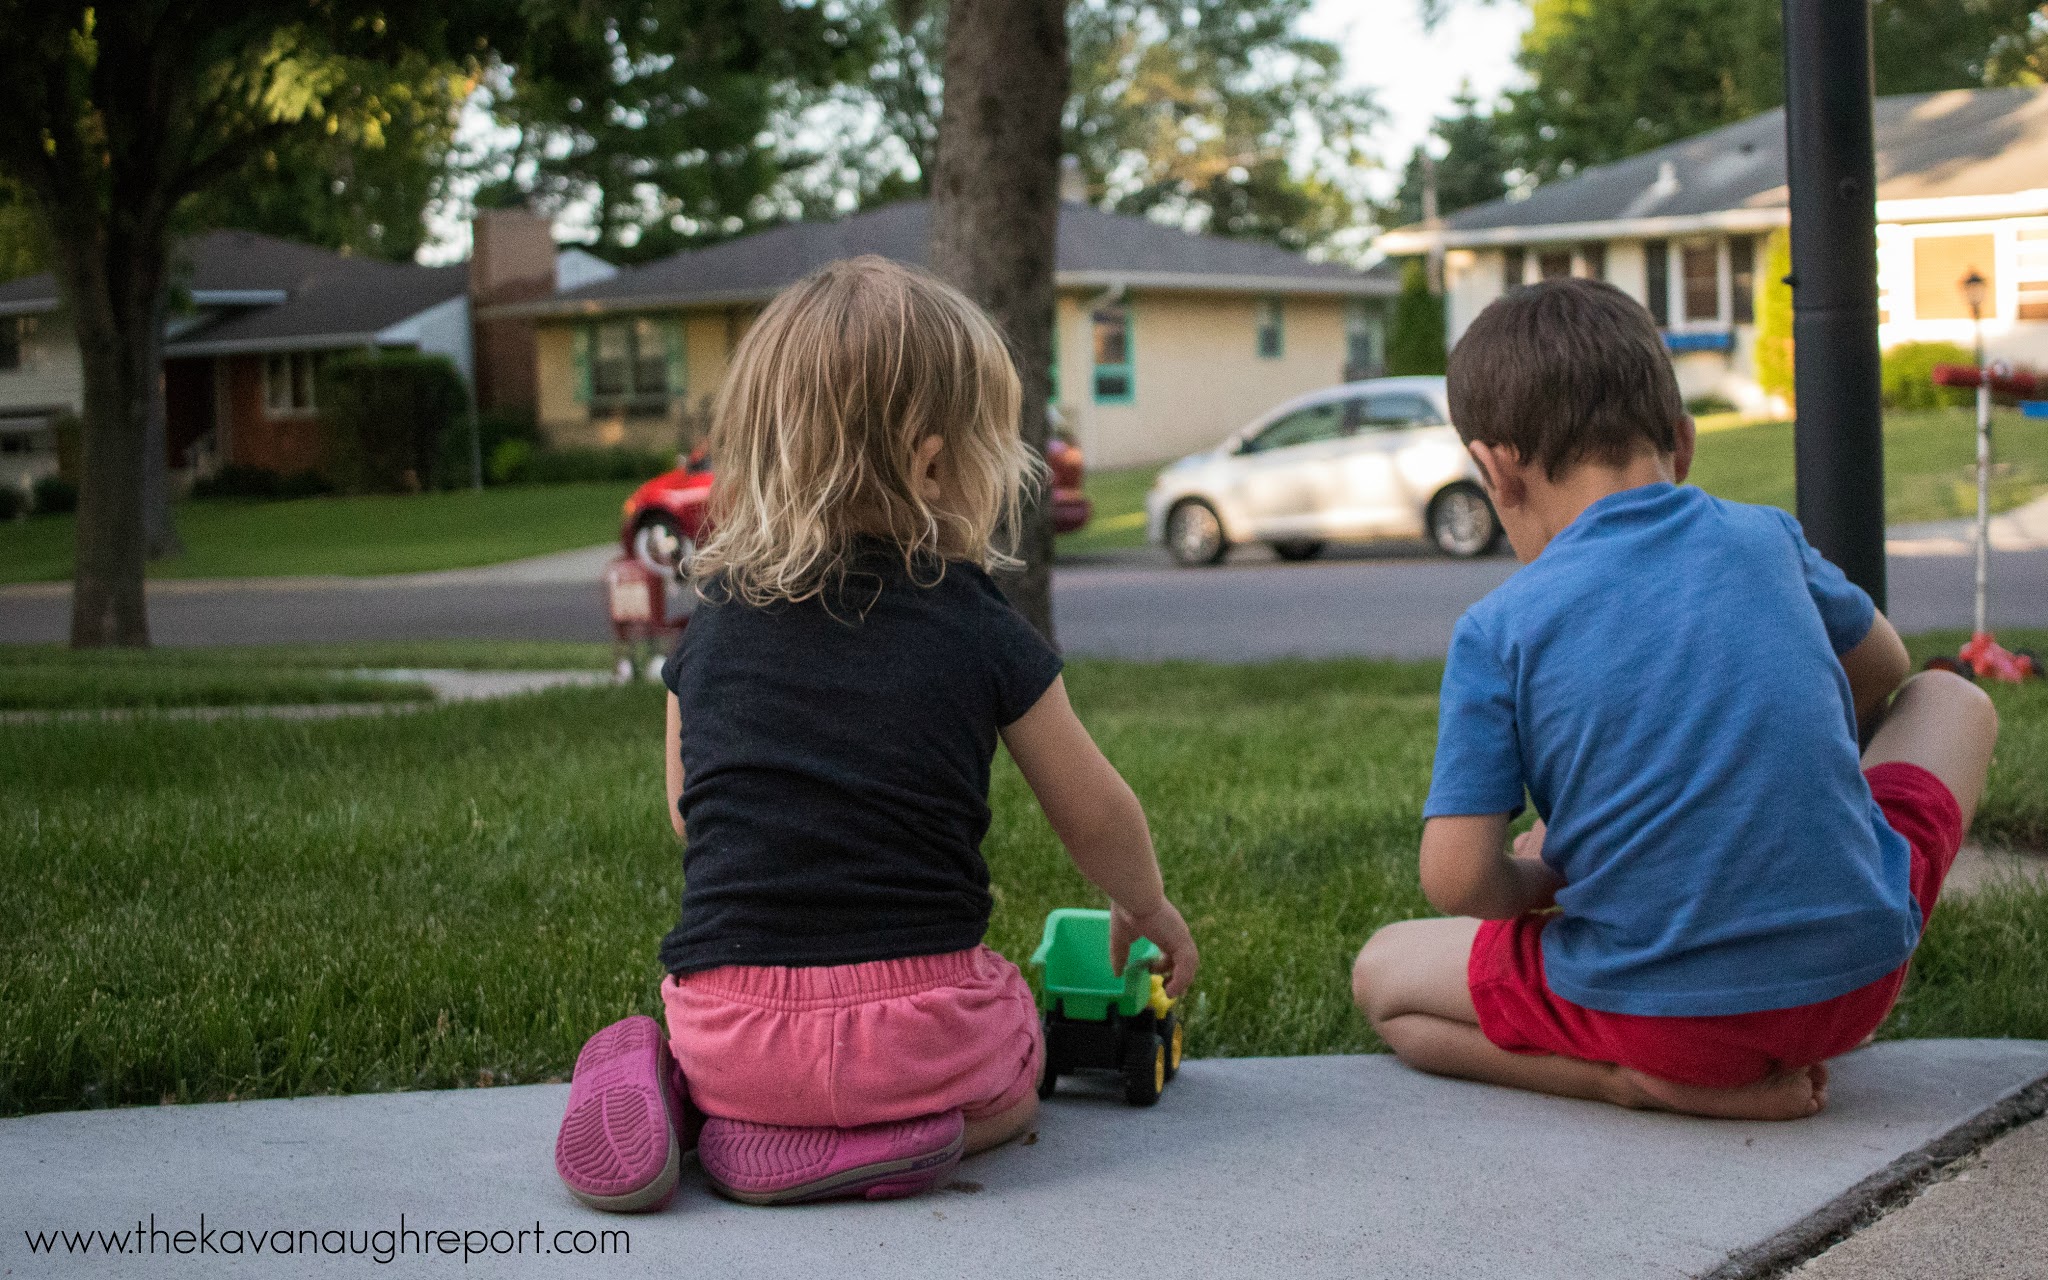 Siblings can be good friends, they can even be best friends. Here are 3 ways to help your children become best friends.